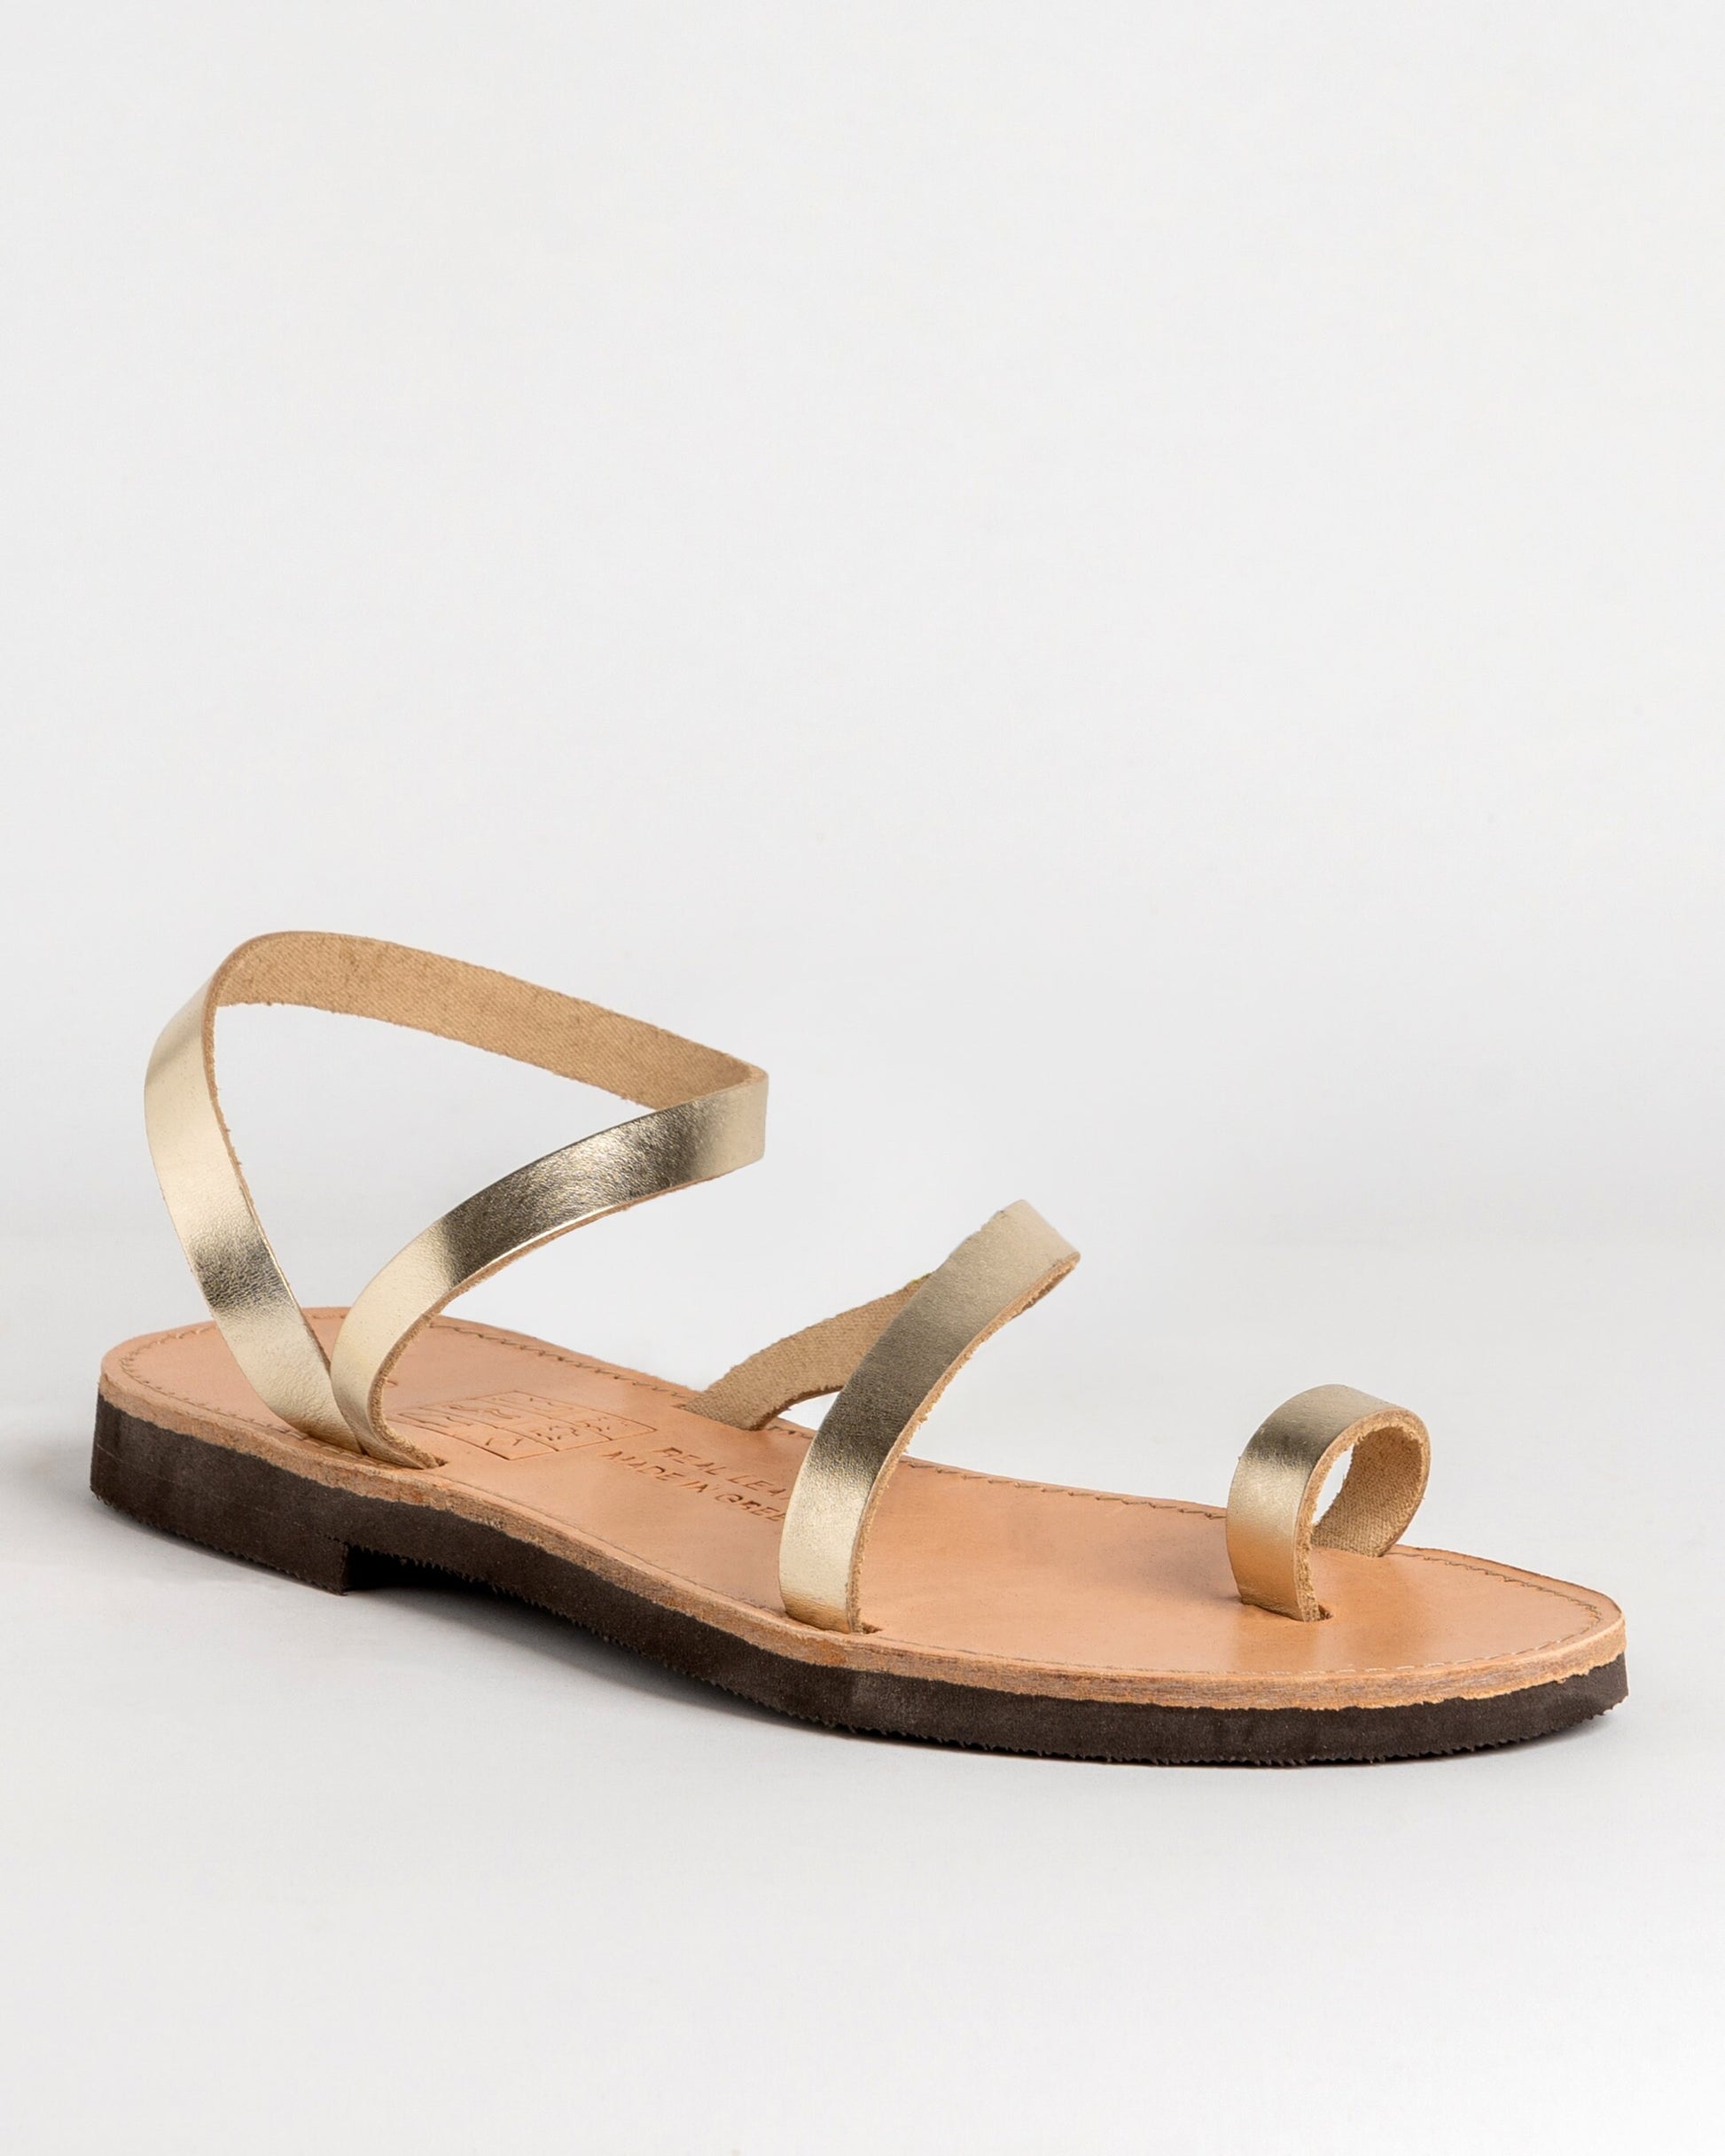 Gold Leather Flat Sandals, Womens Leather Toe ring Sandals, Strappy Leather Sandals, Sandales Grecques